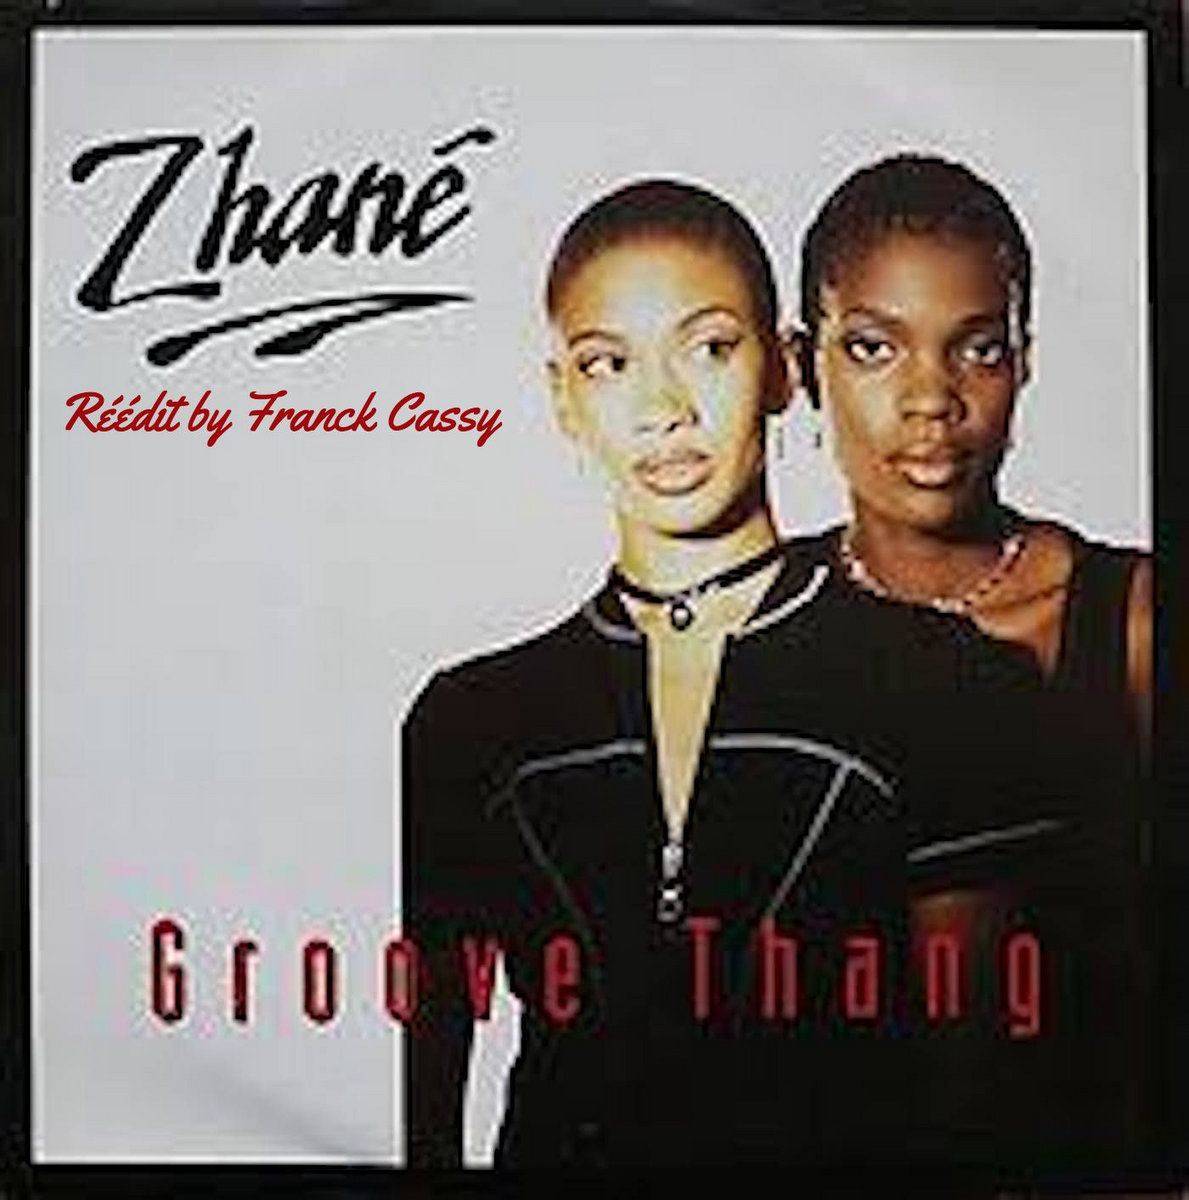 zhane groove thang free mp3